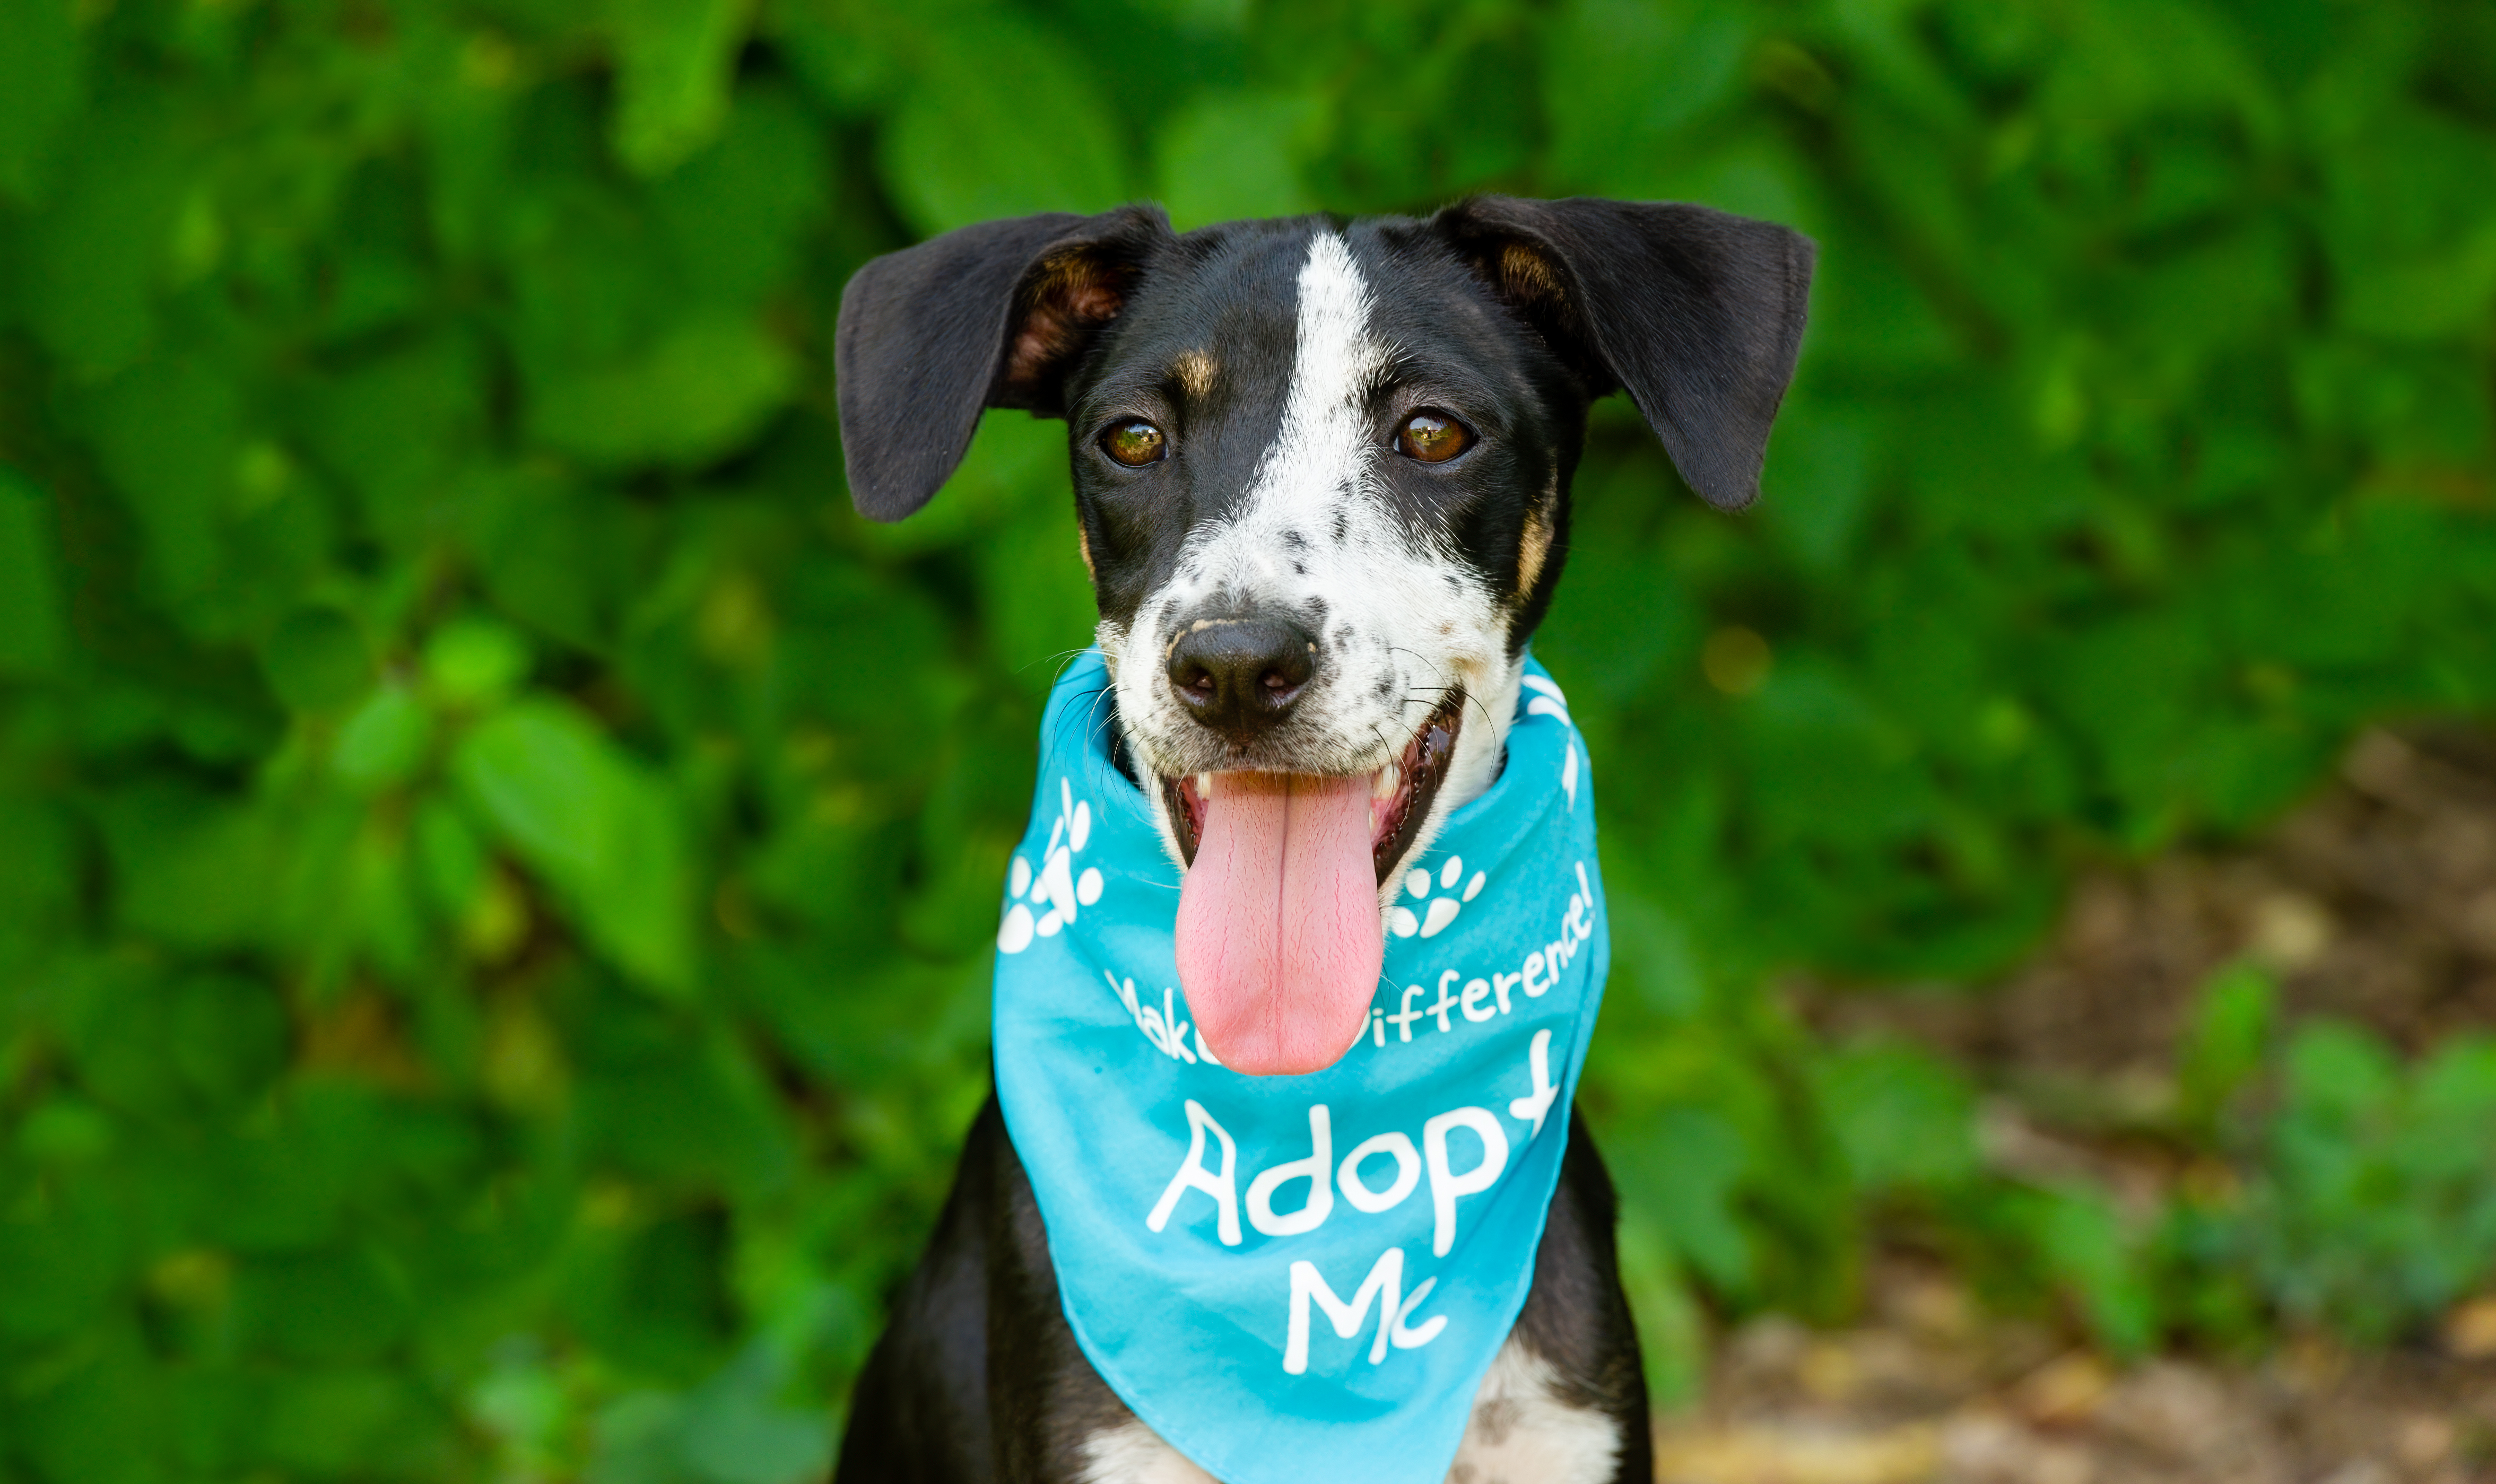 A black and white foster dog wearing a blue bandana that says adopt me